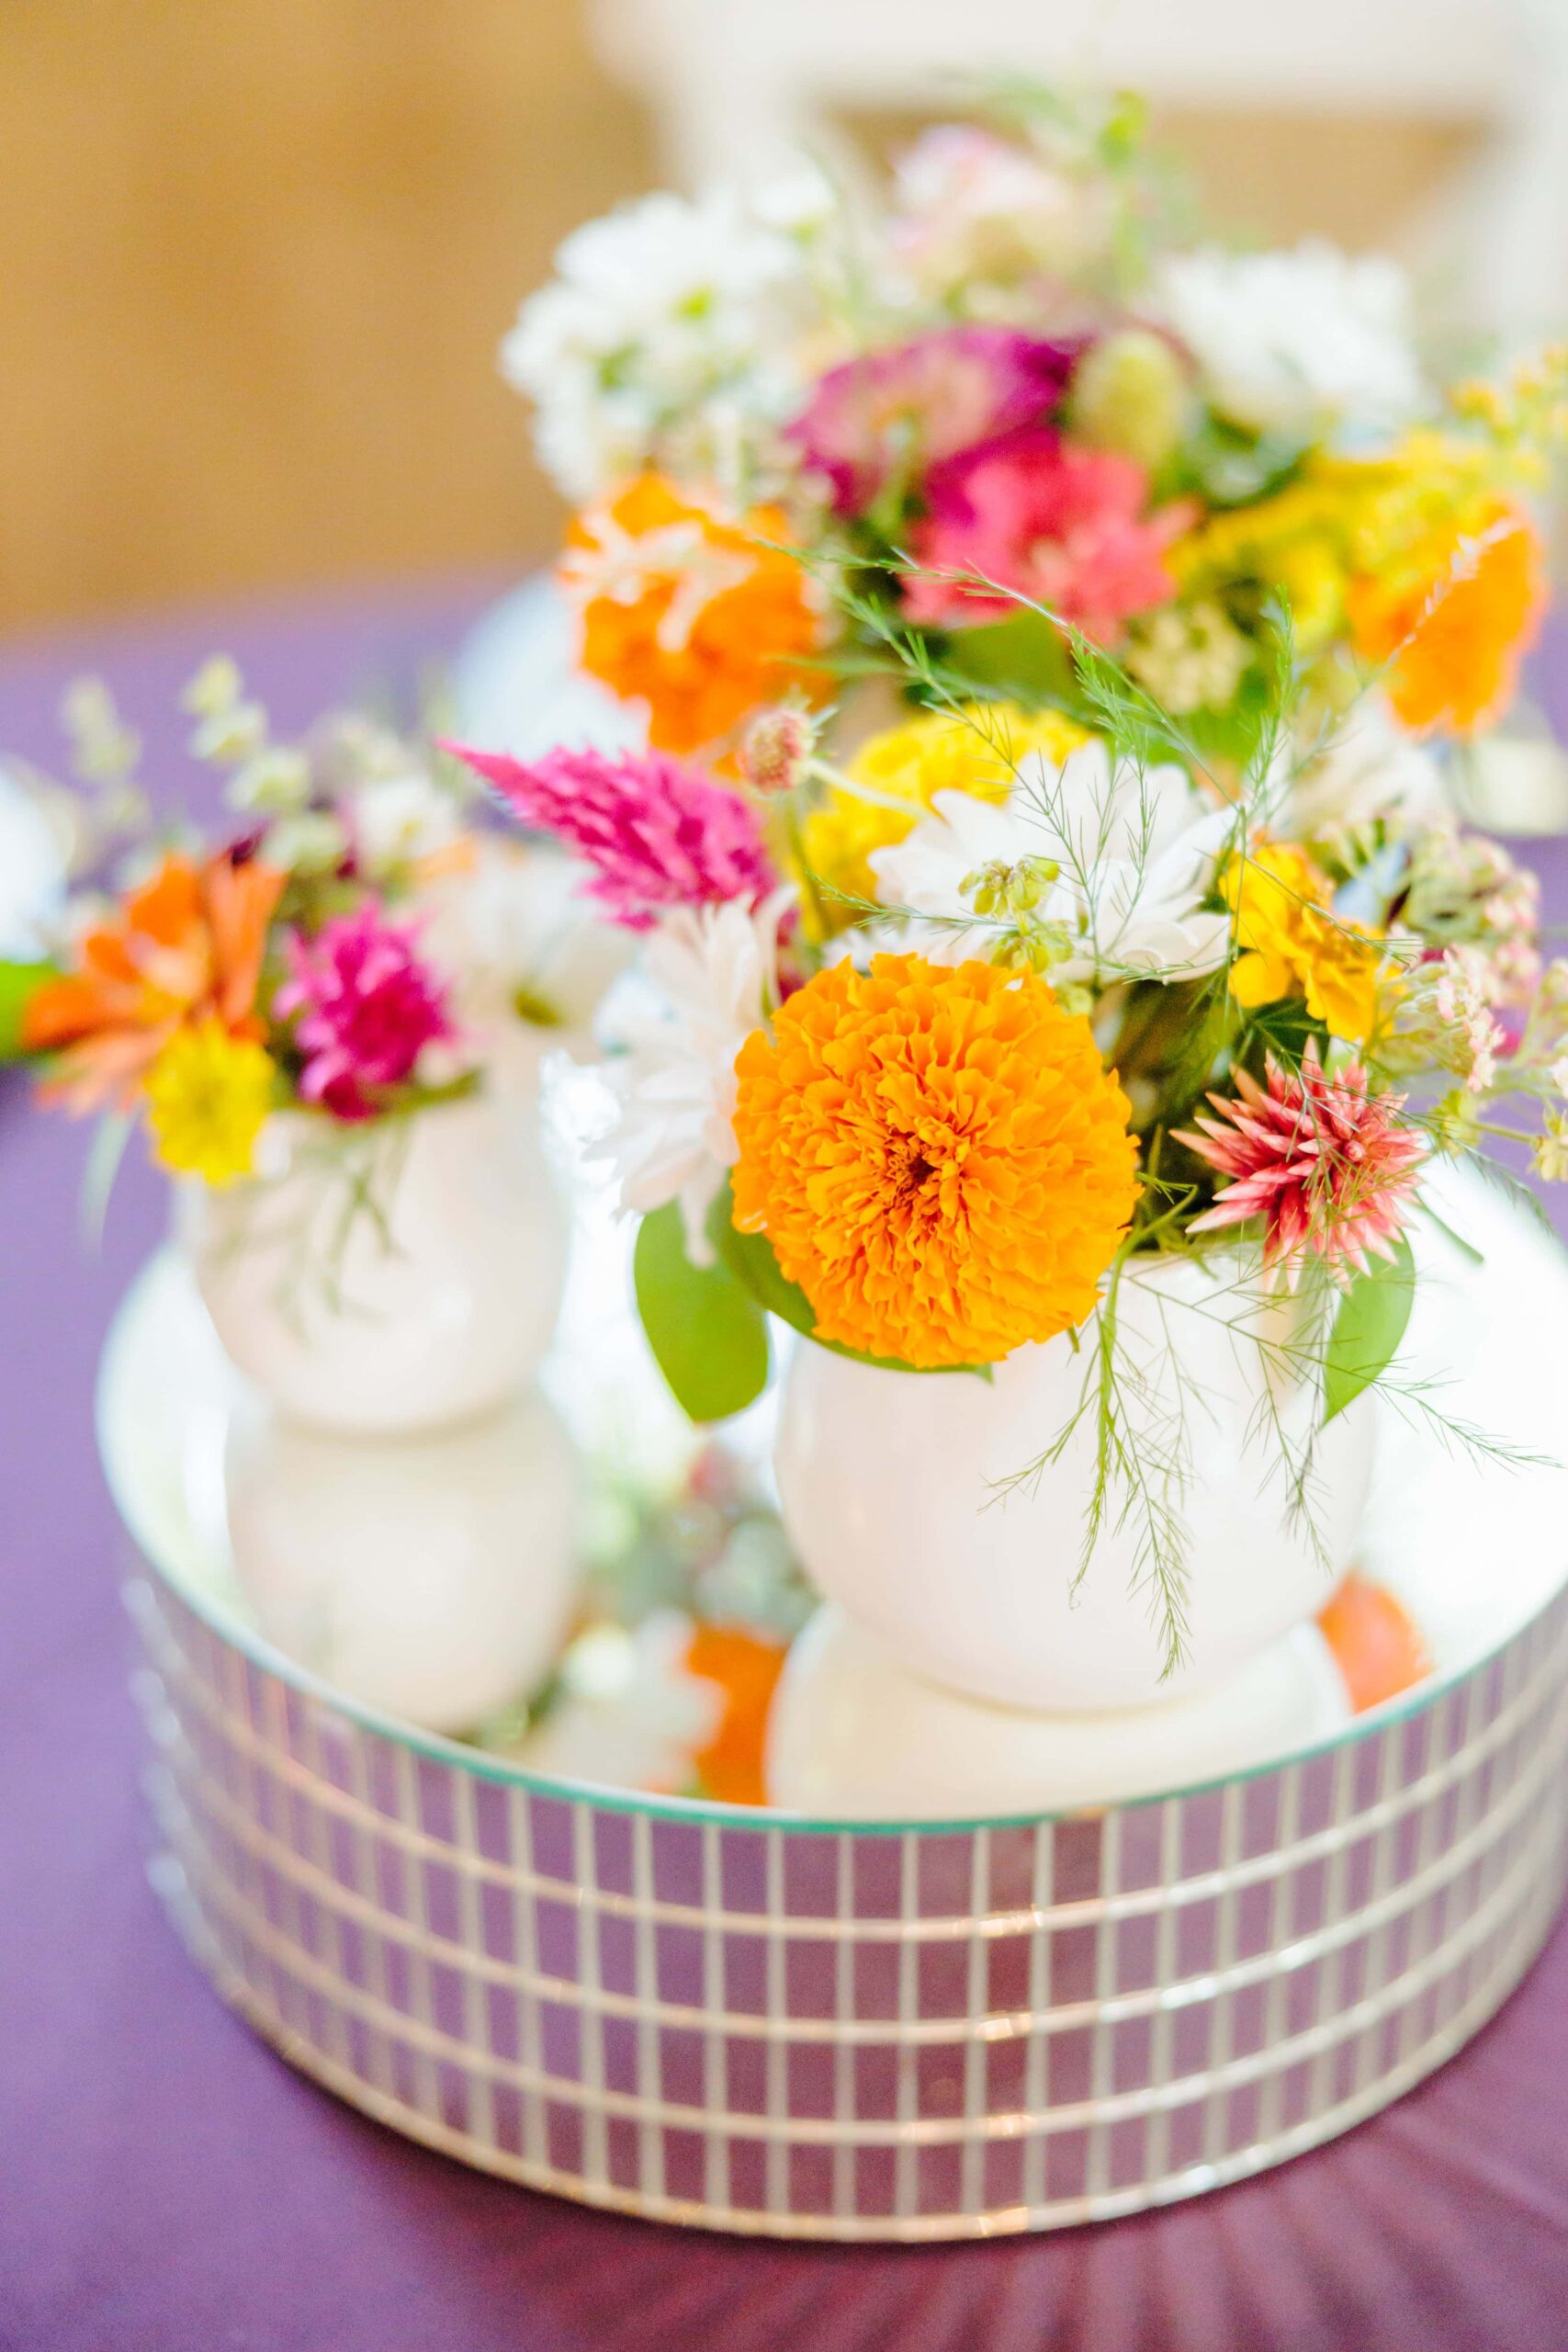 Bright orange flowers sit on a disco riser, keeping in theme for this 70s wedding.